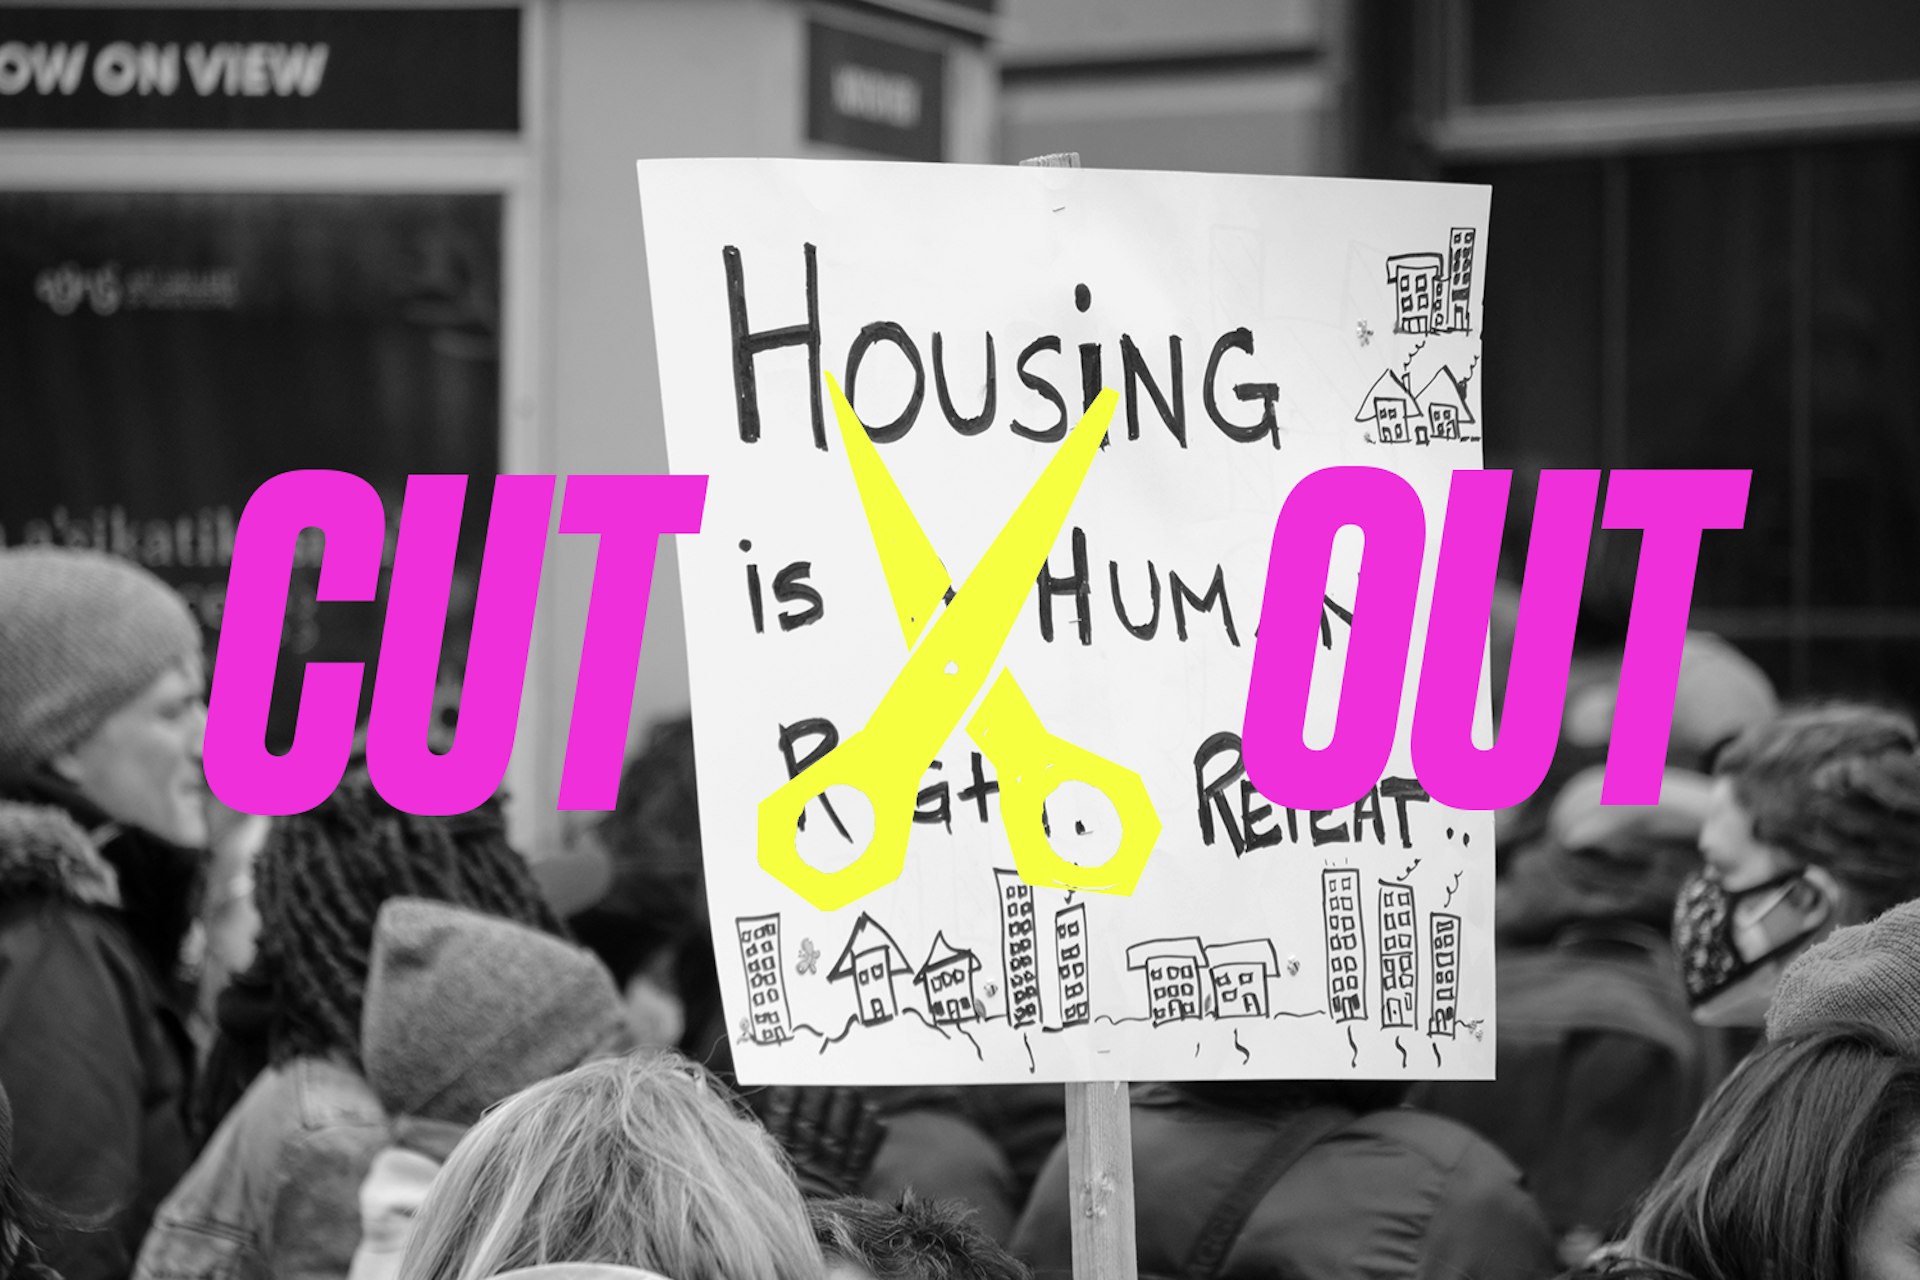 How activists have fought back against the escalating housing crisis